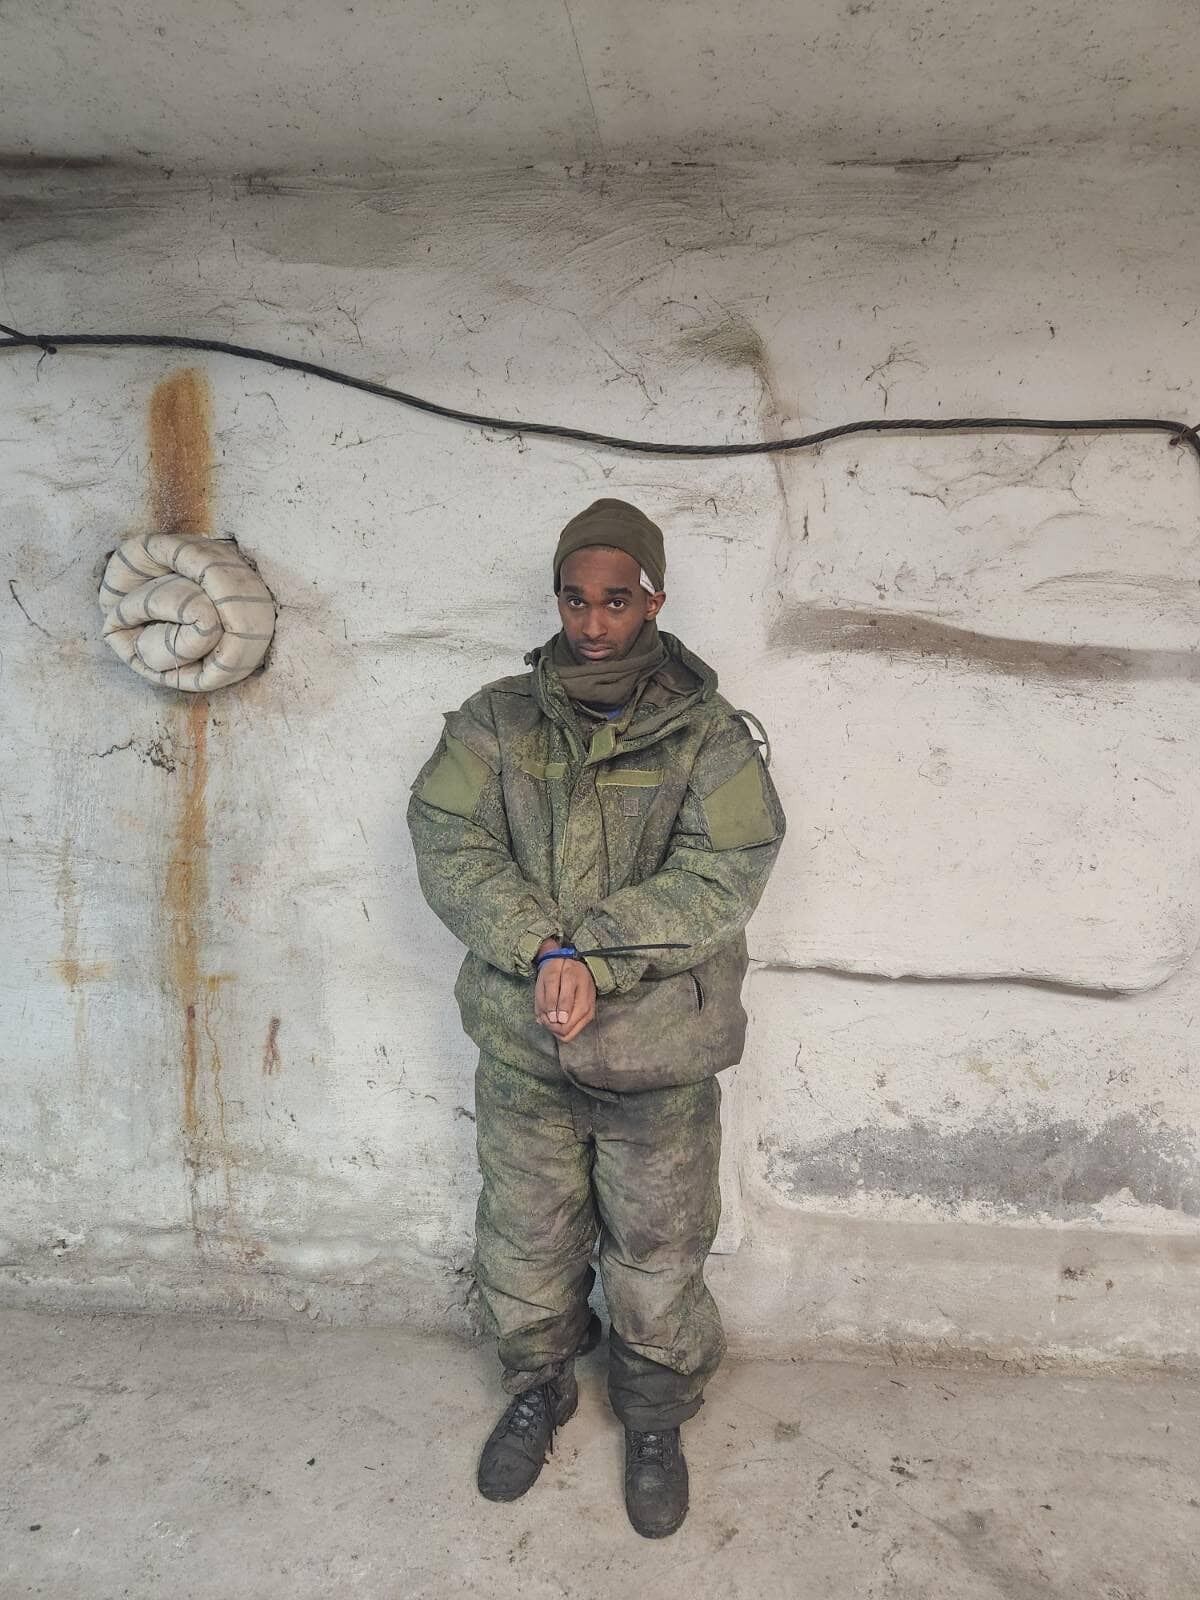 Somali man surrendered to AFU and spoke about the abuse in the Russian army. Photos